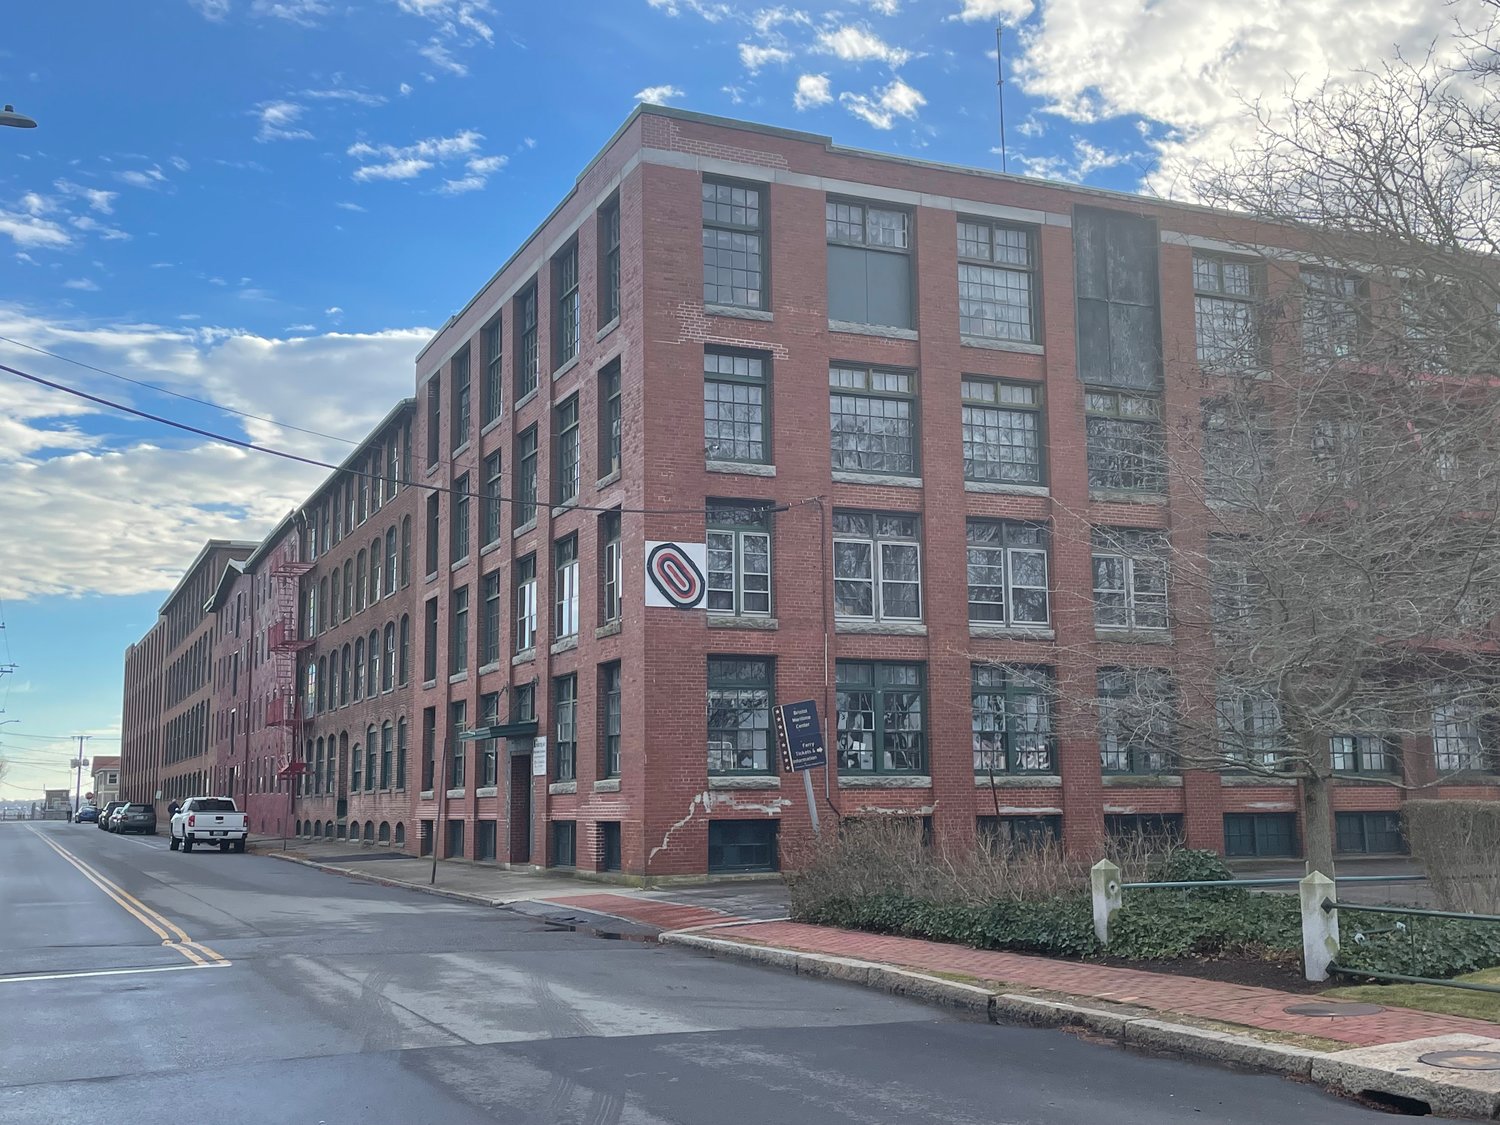 A number used to assess how many units can be built at the former Robin Rug mill building is being contested by advocates who say it includes space within the footprint that cannot be built upon or altered.